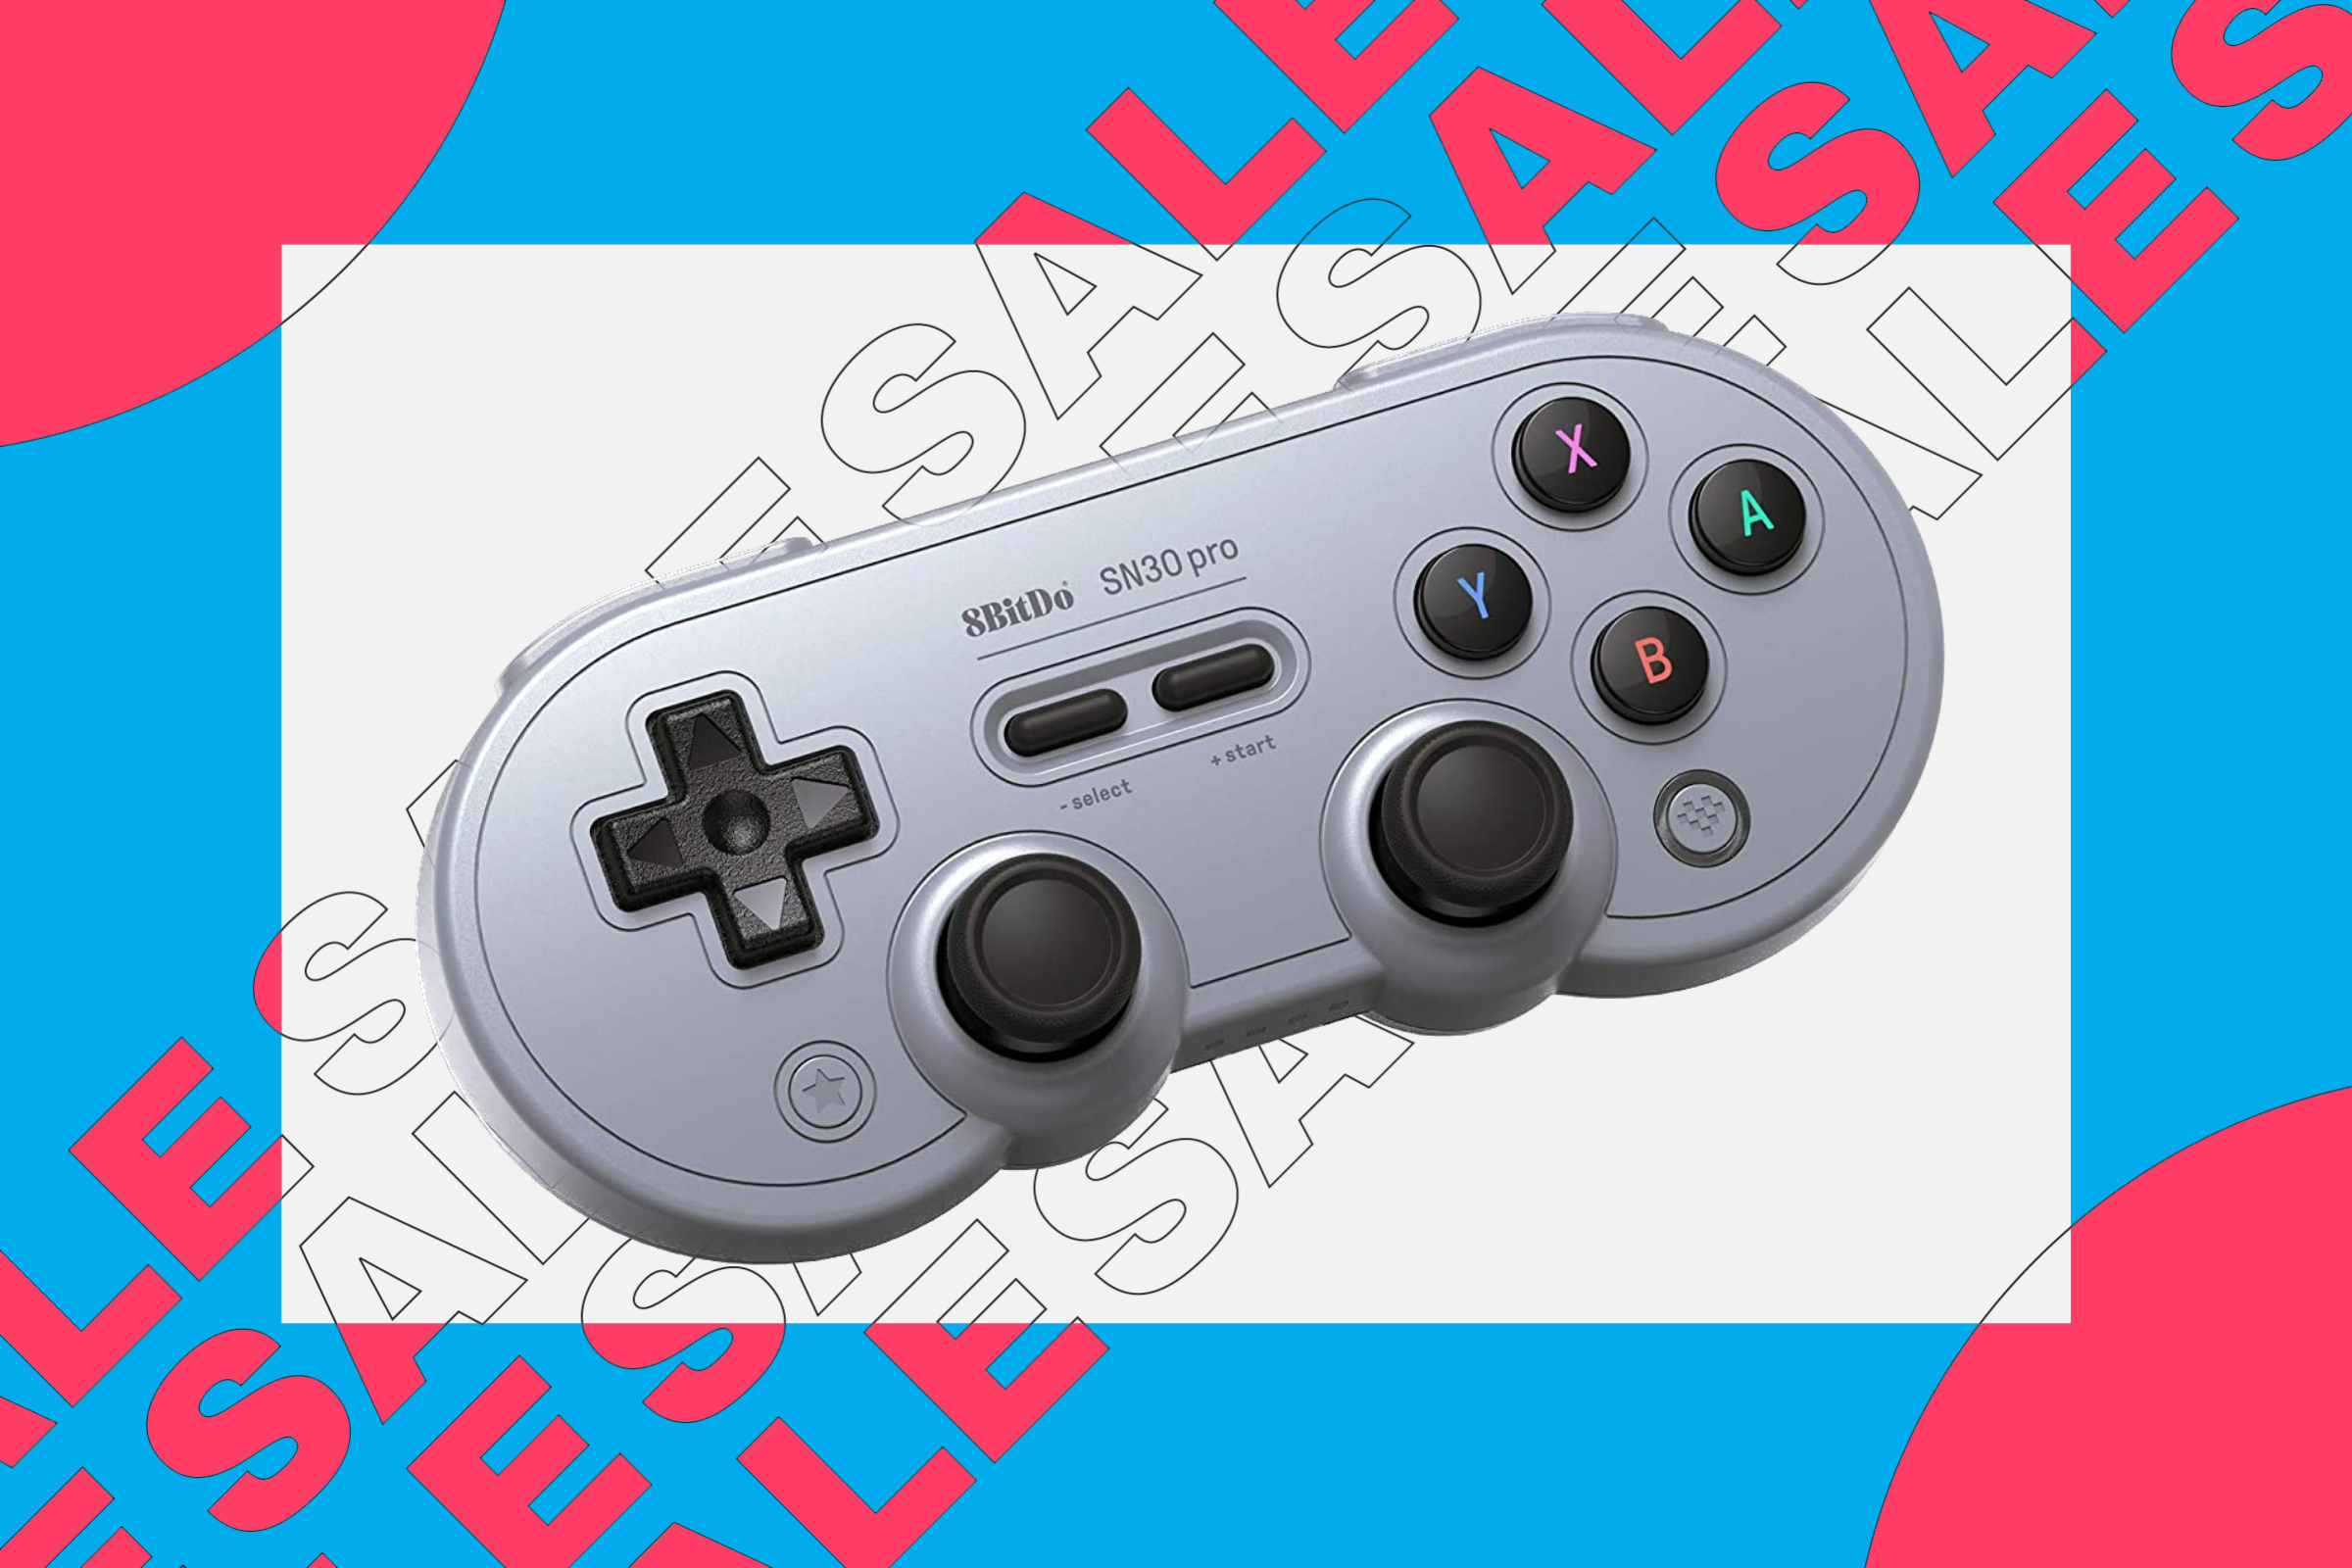 8bitdo controller on sale background pink and blue